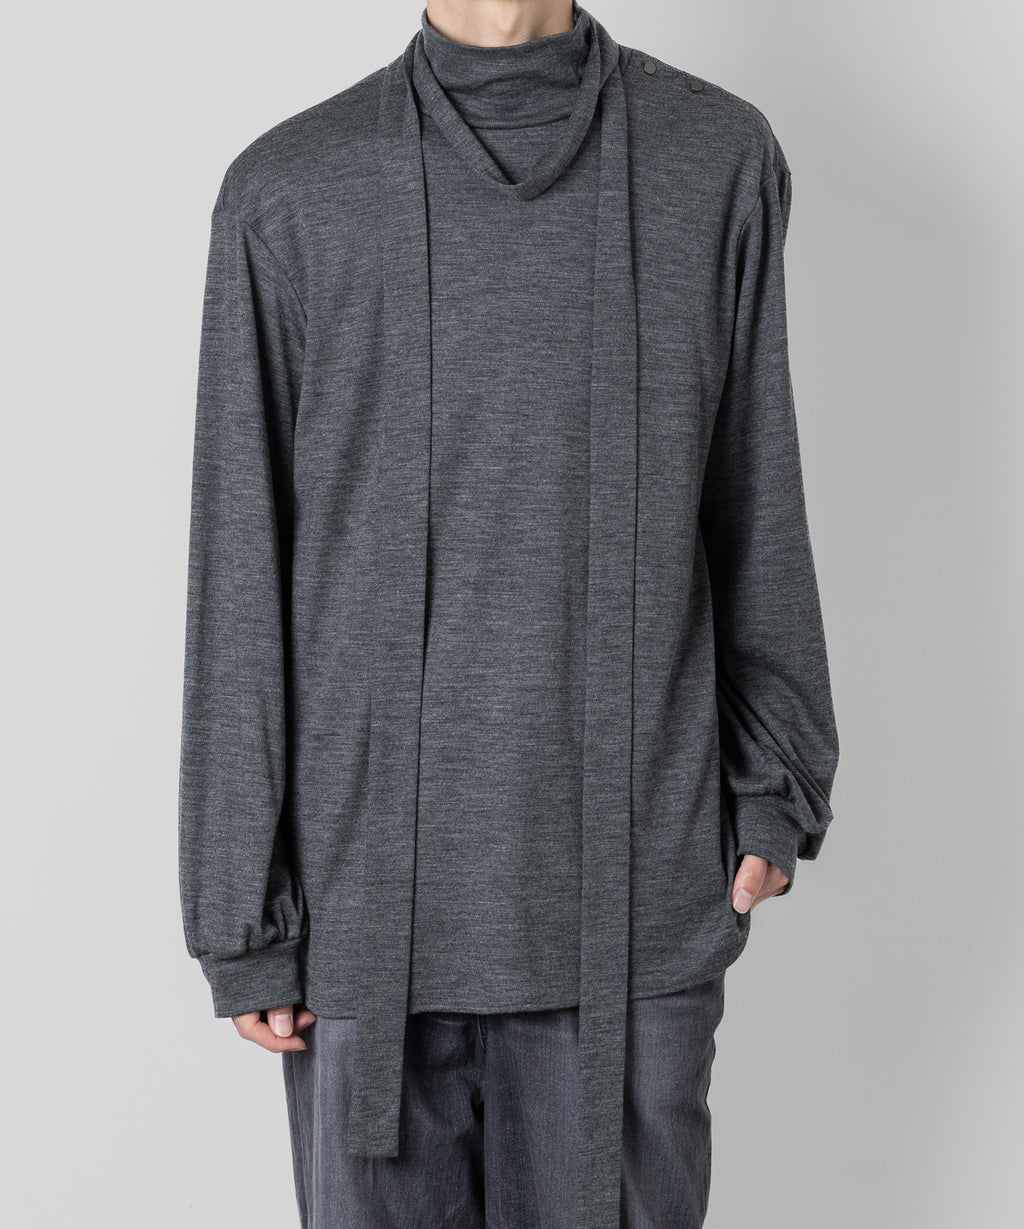 ato(アトウ)のSTAND COLLAR JERSEY WITH STALLのCHARCOAL